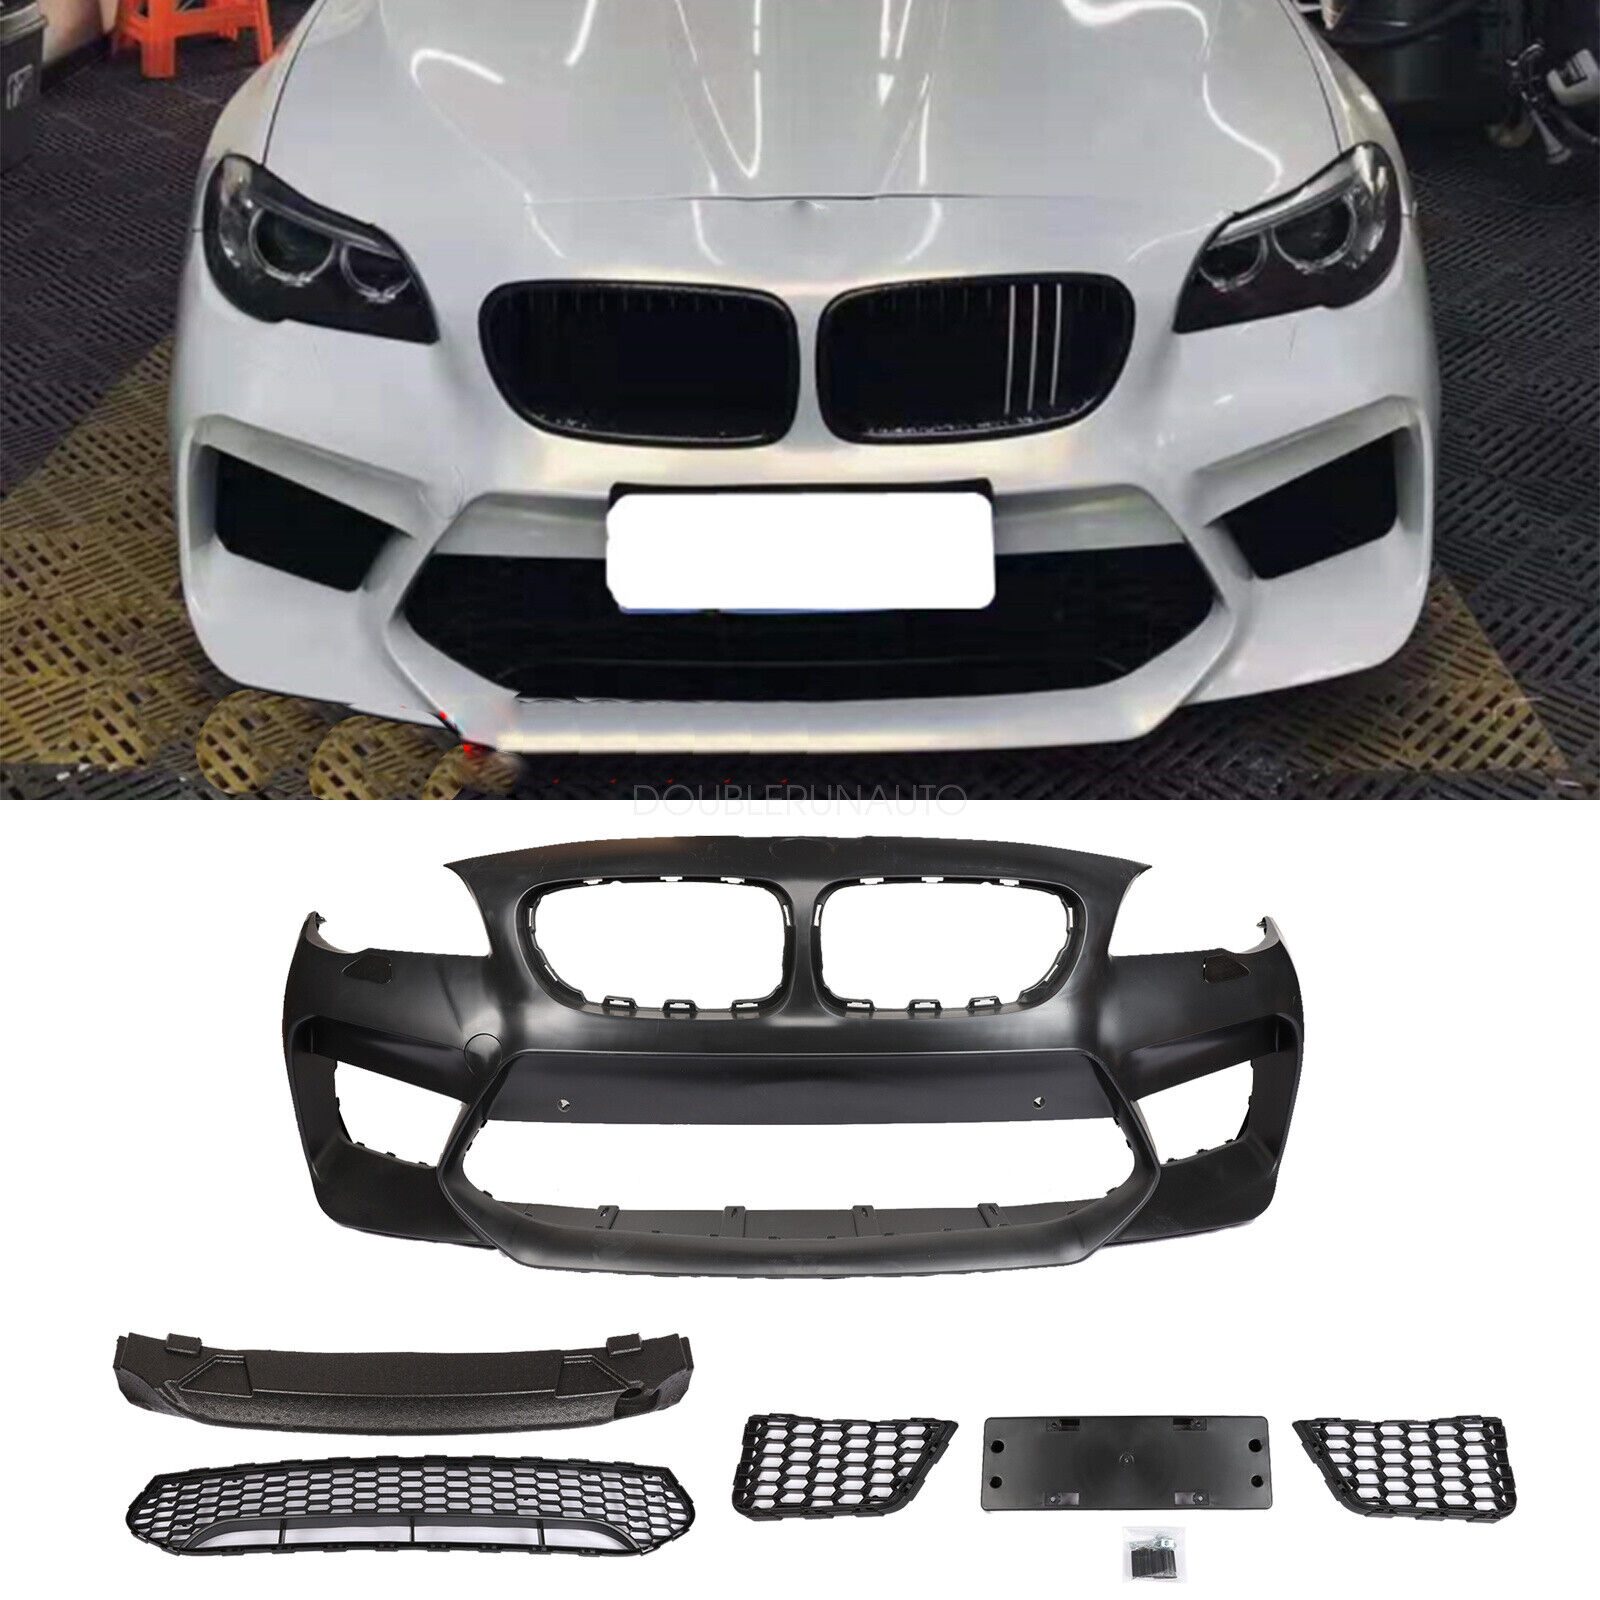 G30 M5 Look style Front Bumper Cover Fit for BMW 5-Series 11-17  F10 M5 style